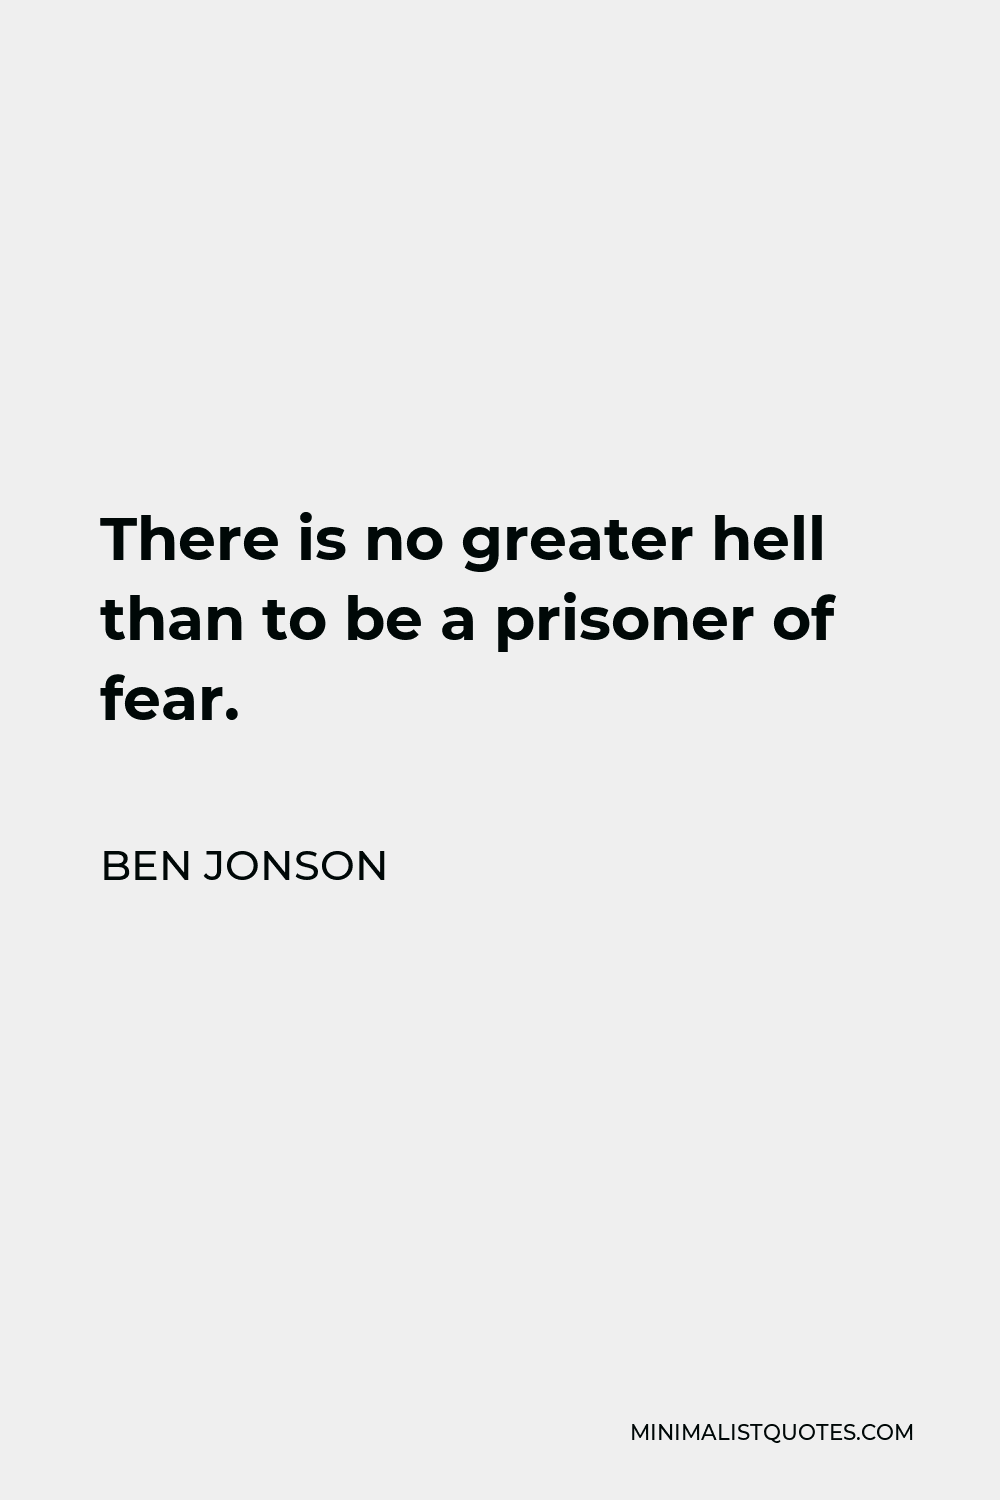 Ben Jonson Quote - There is no greater hell than to be a prisoner of fear.